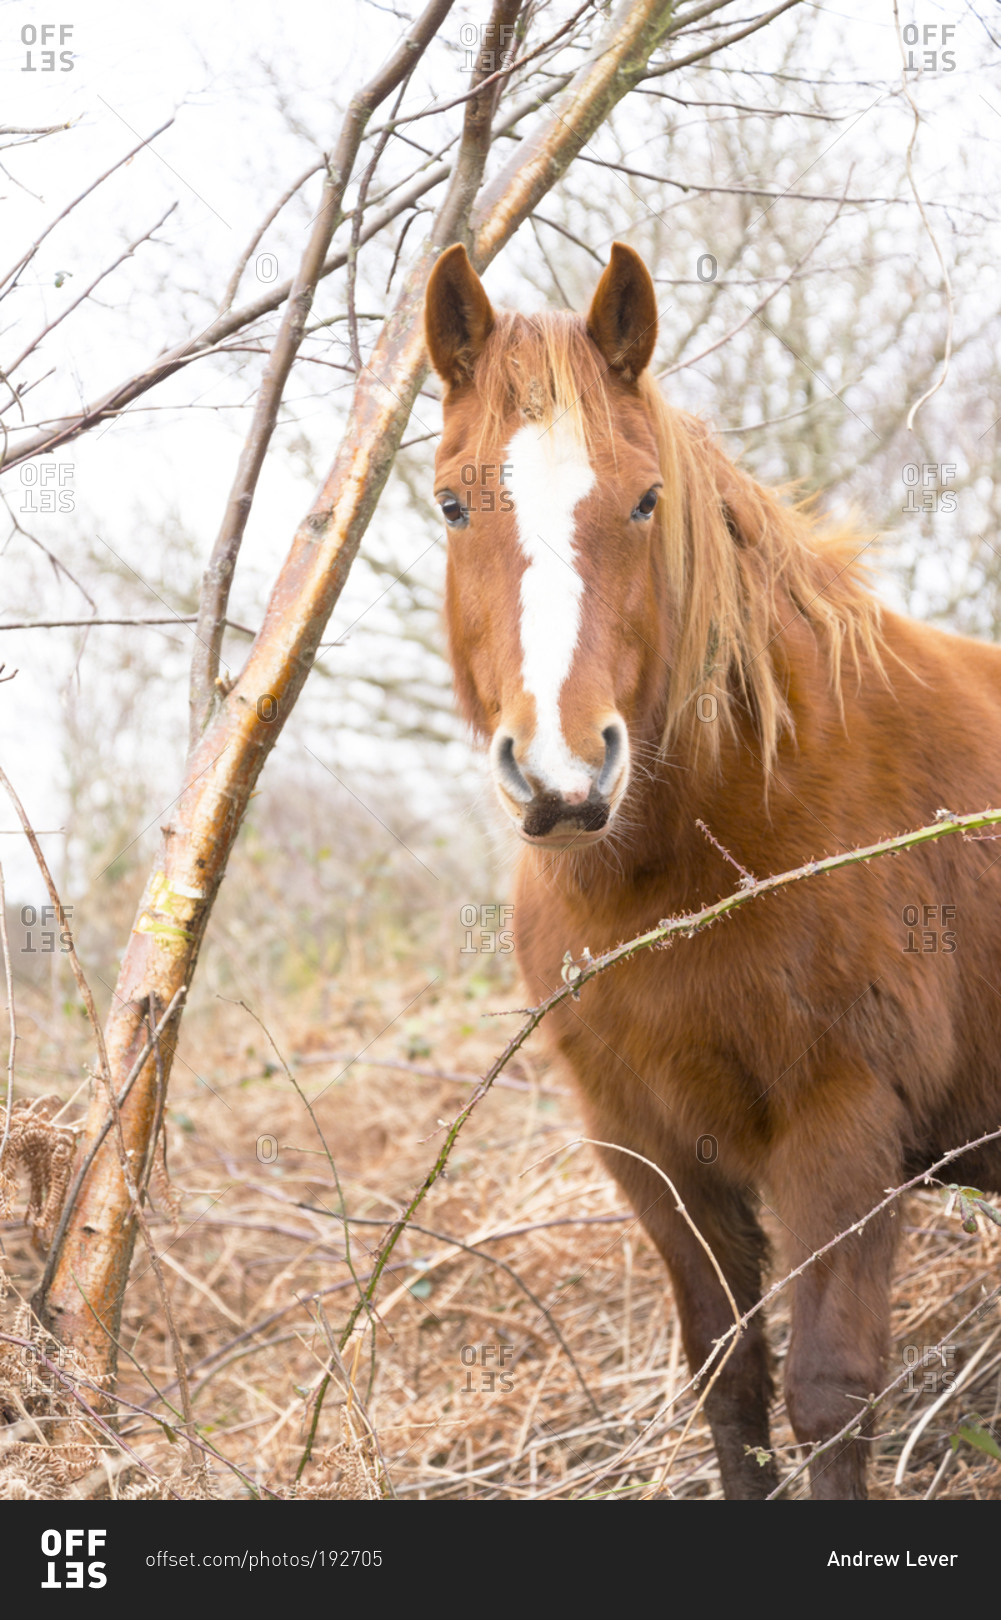 A shaggy brown horse standing in brush